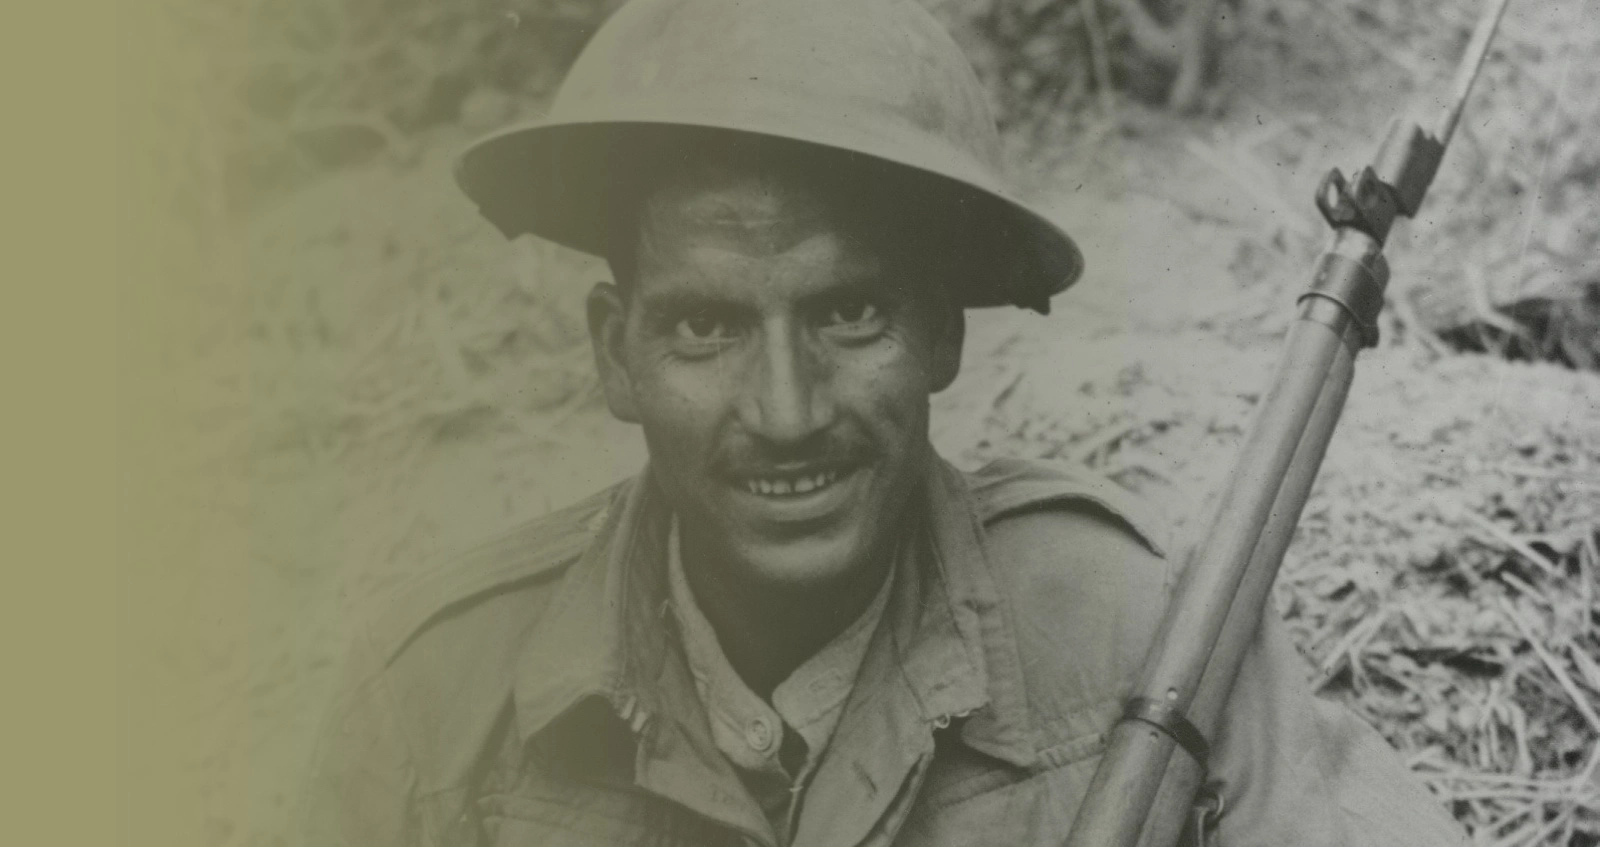 A sharp shooter of the Indian Army, fighting in alliance with the British, poses with his rifle, at an unknown location in Burma, in March 1944